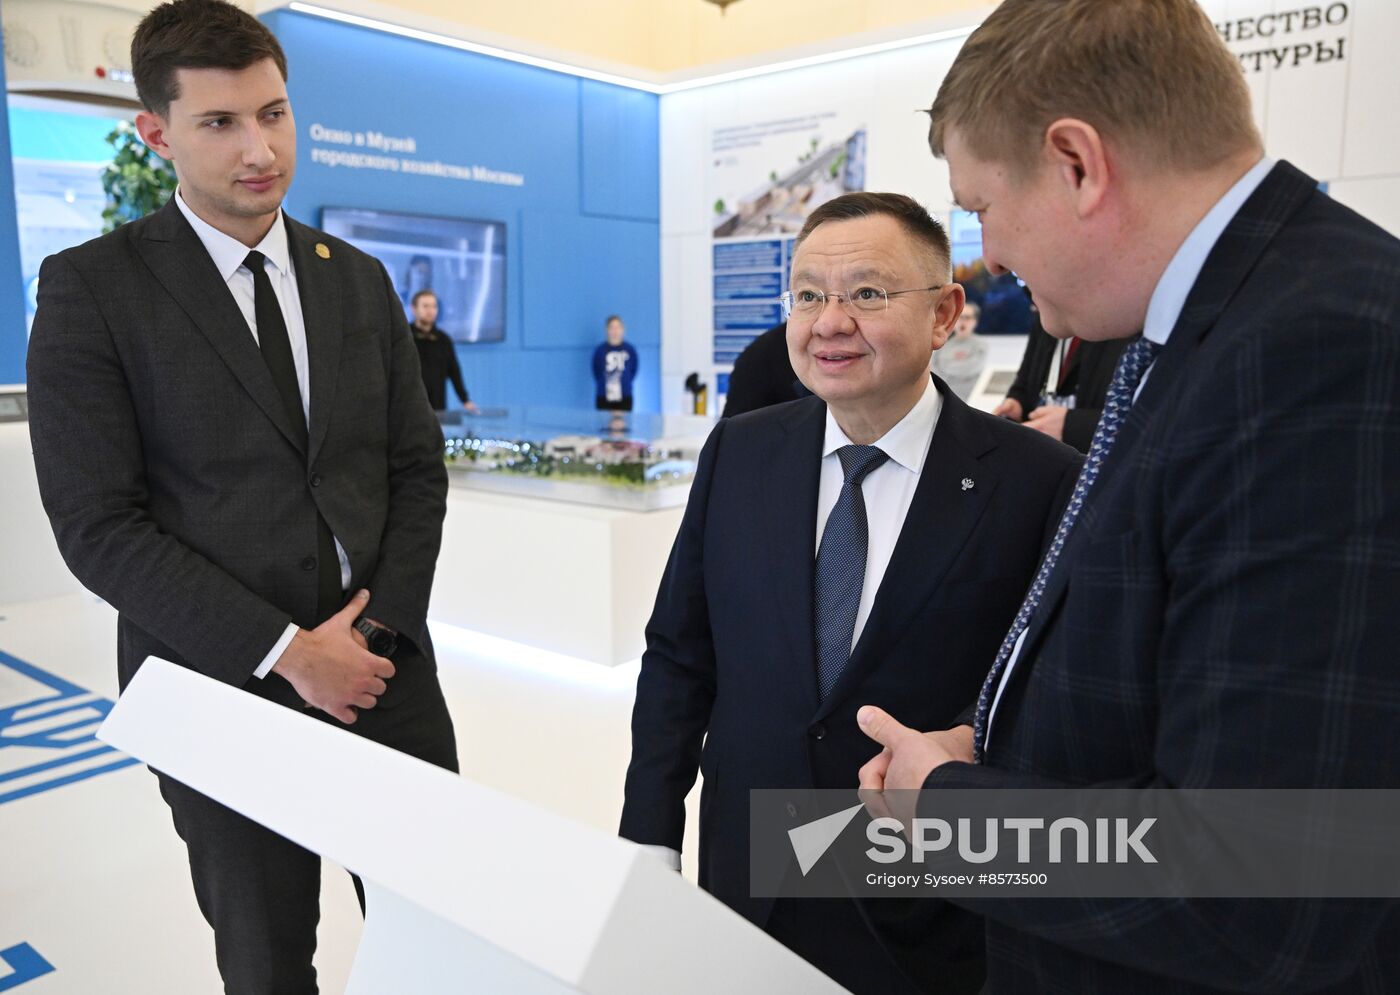 RUSSIA EXPO. Russian deputy prime minisiter Marat Khusnullin to view exhibits of Construction Ministry "Building the Future" and Transport Ministry's "Russia in Motion"